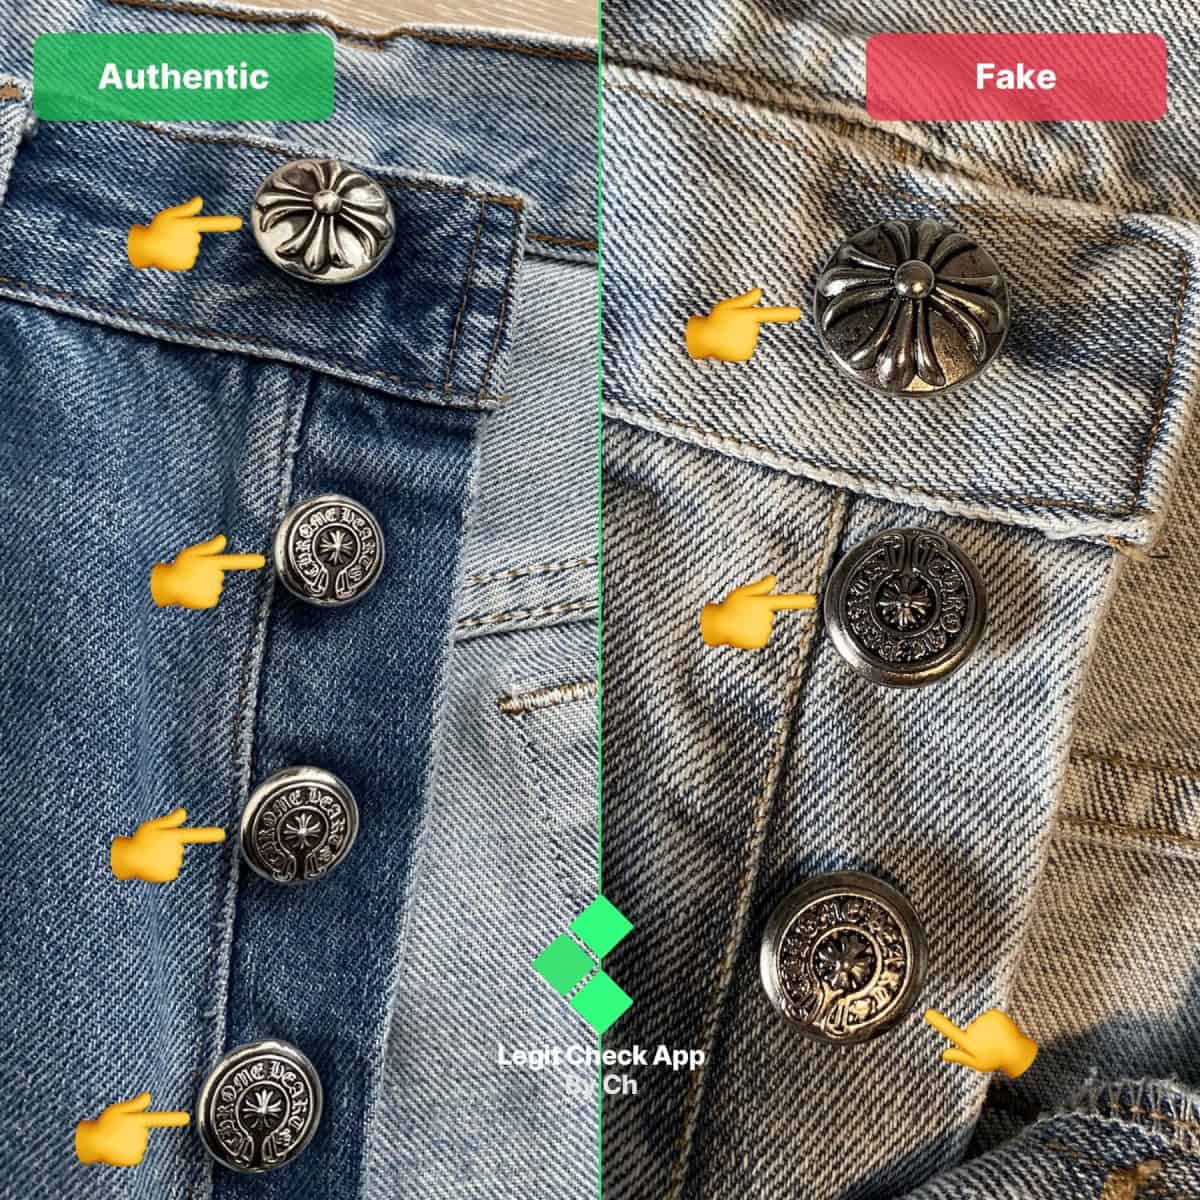 fake vs real ch jeans